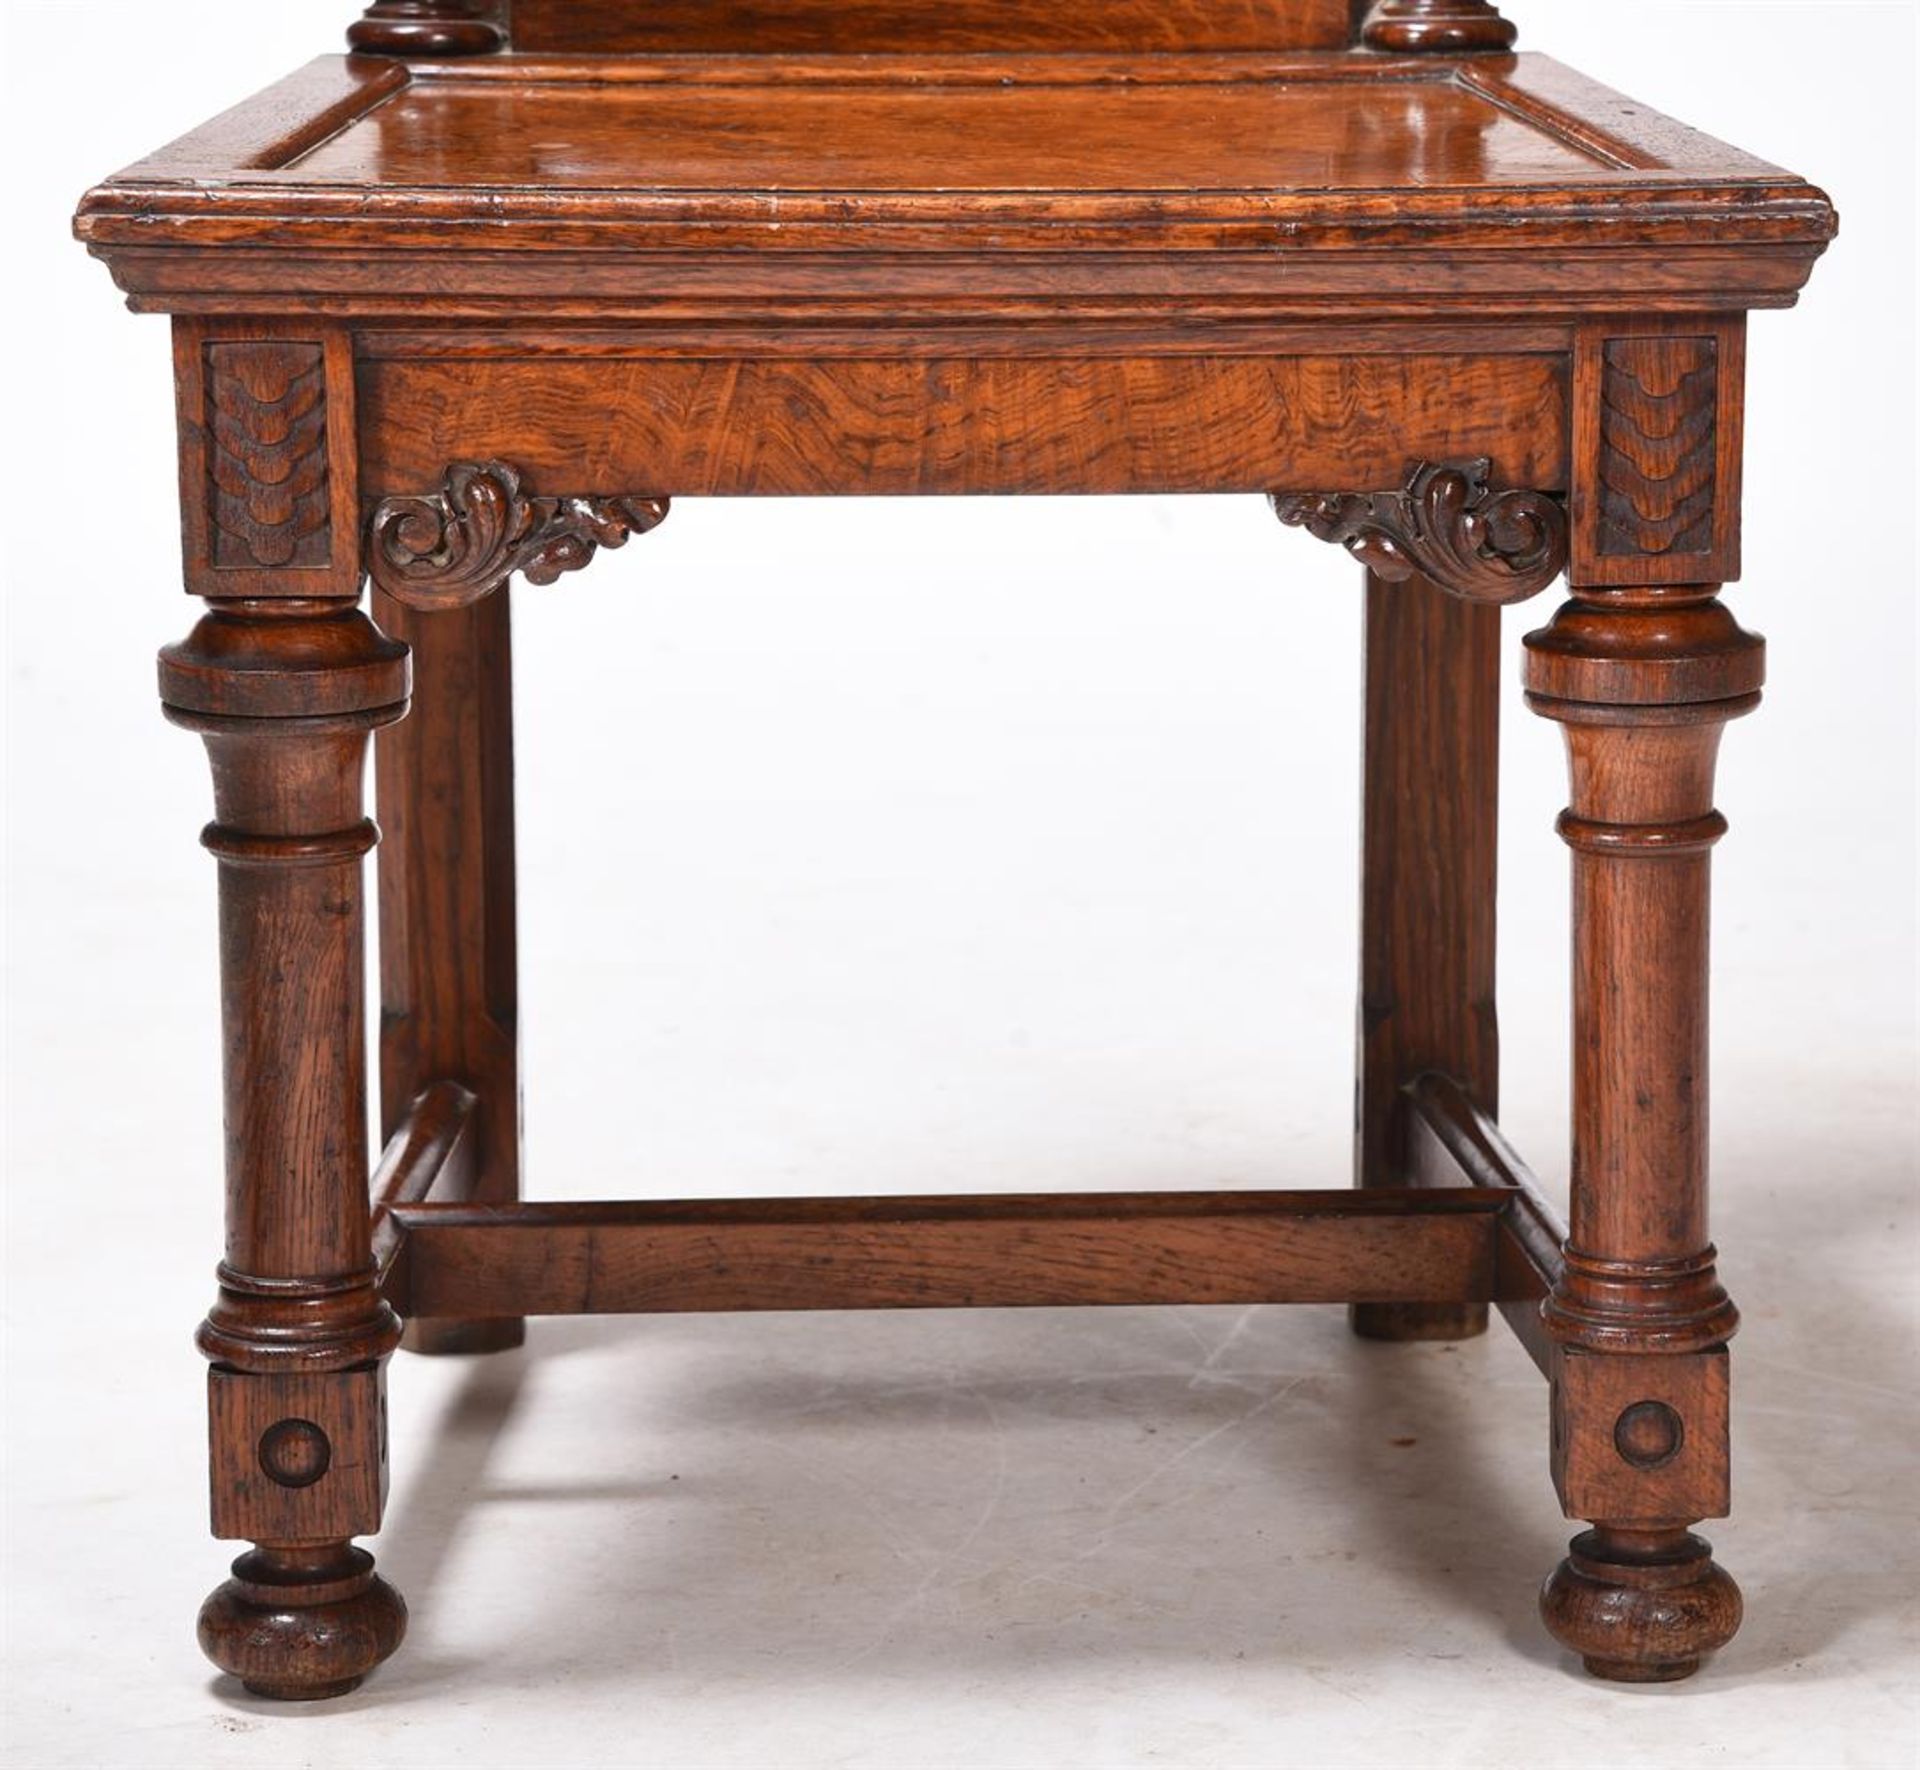 A PAIR OF VICTORIAN FIGURED OAK AND BURR OAK HALL CHAIRS, SECOND HALF 19TH CENTURY - Image 6 of 6